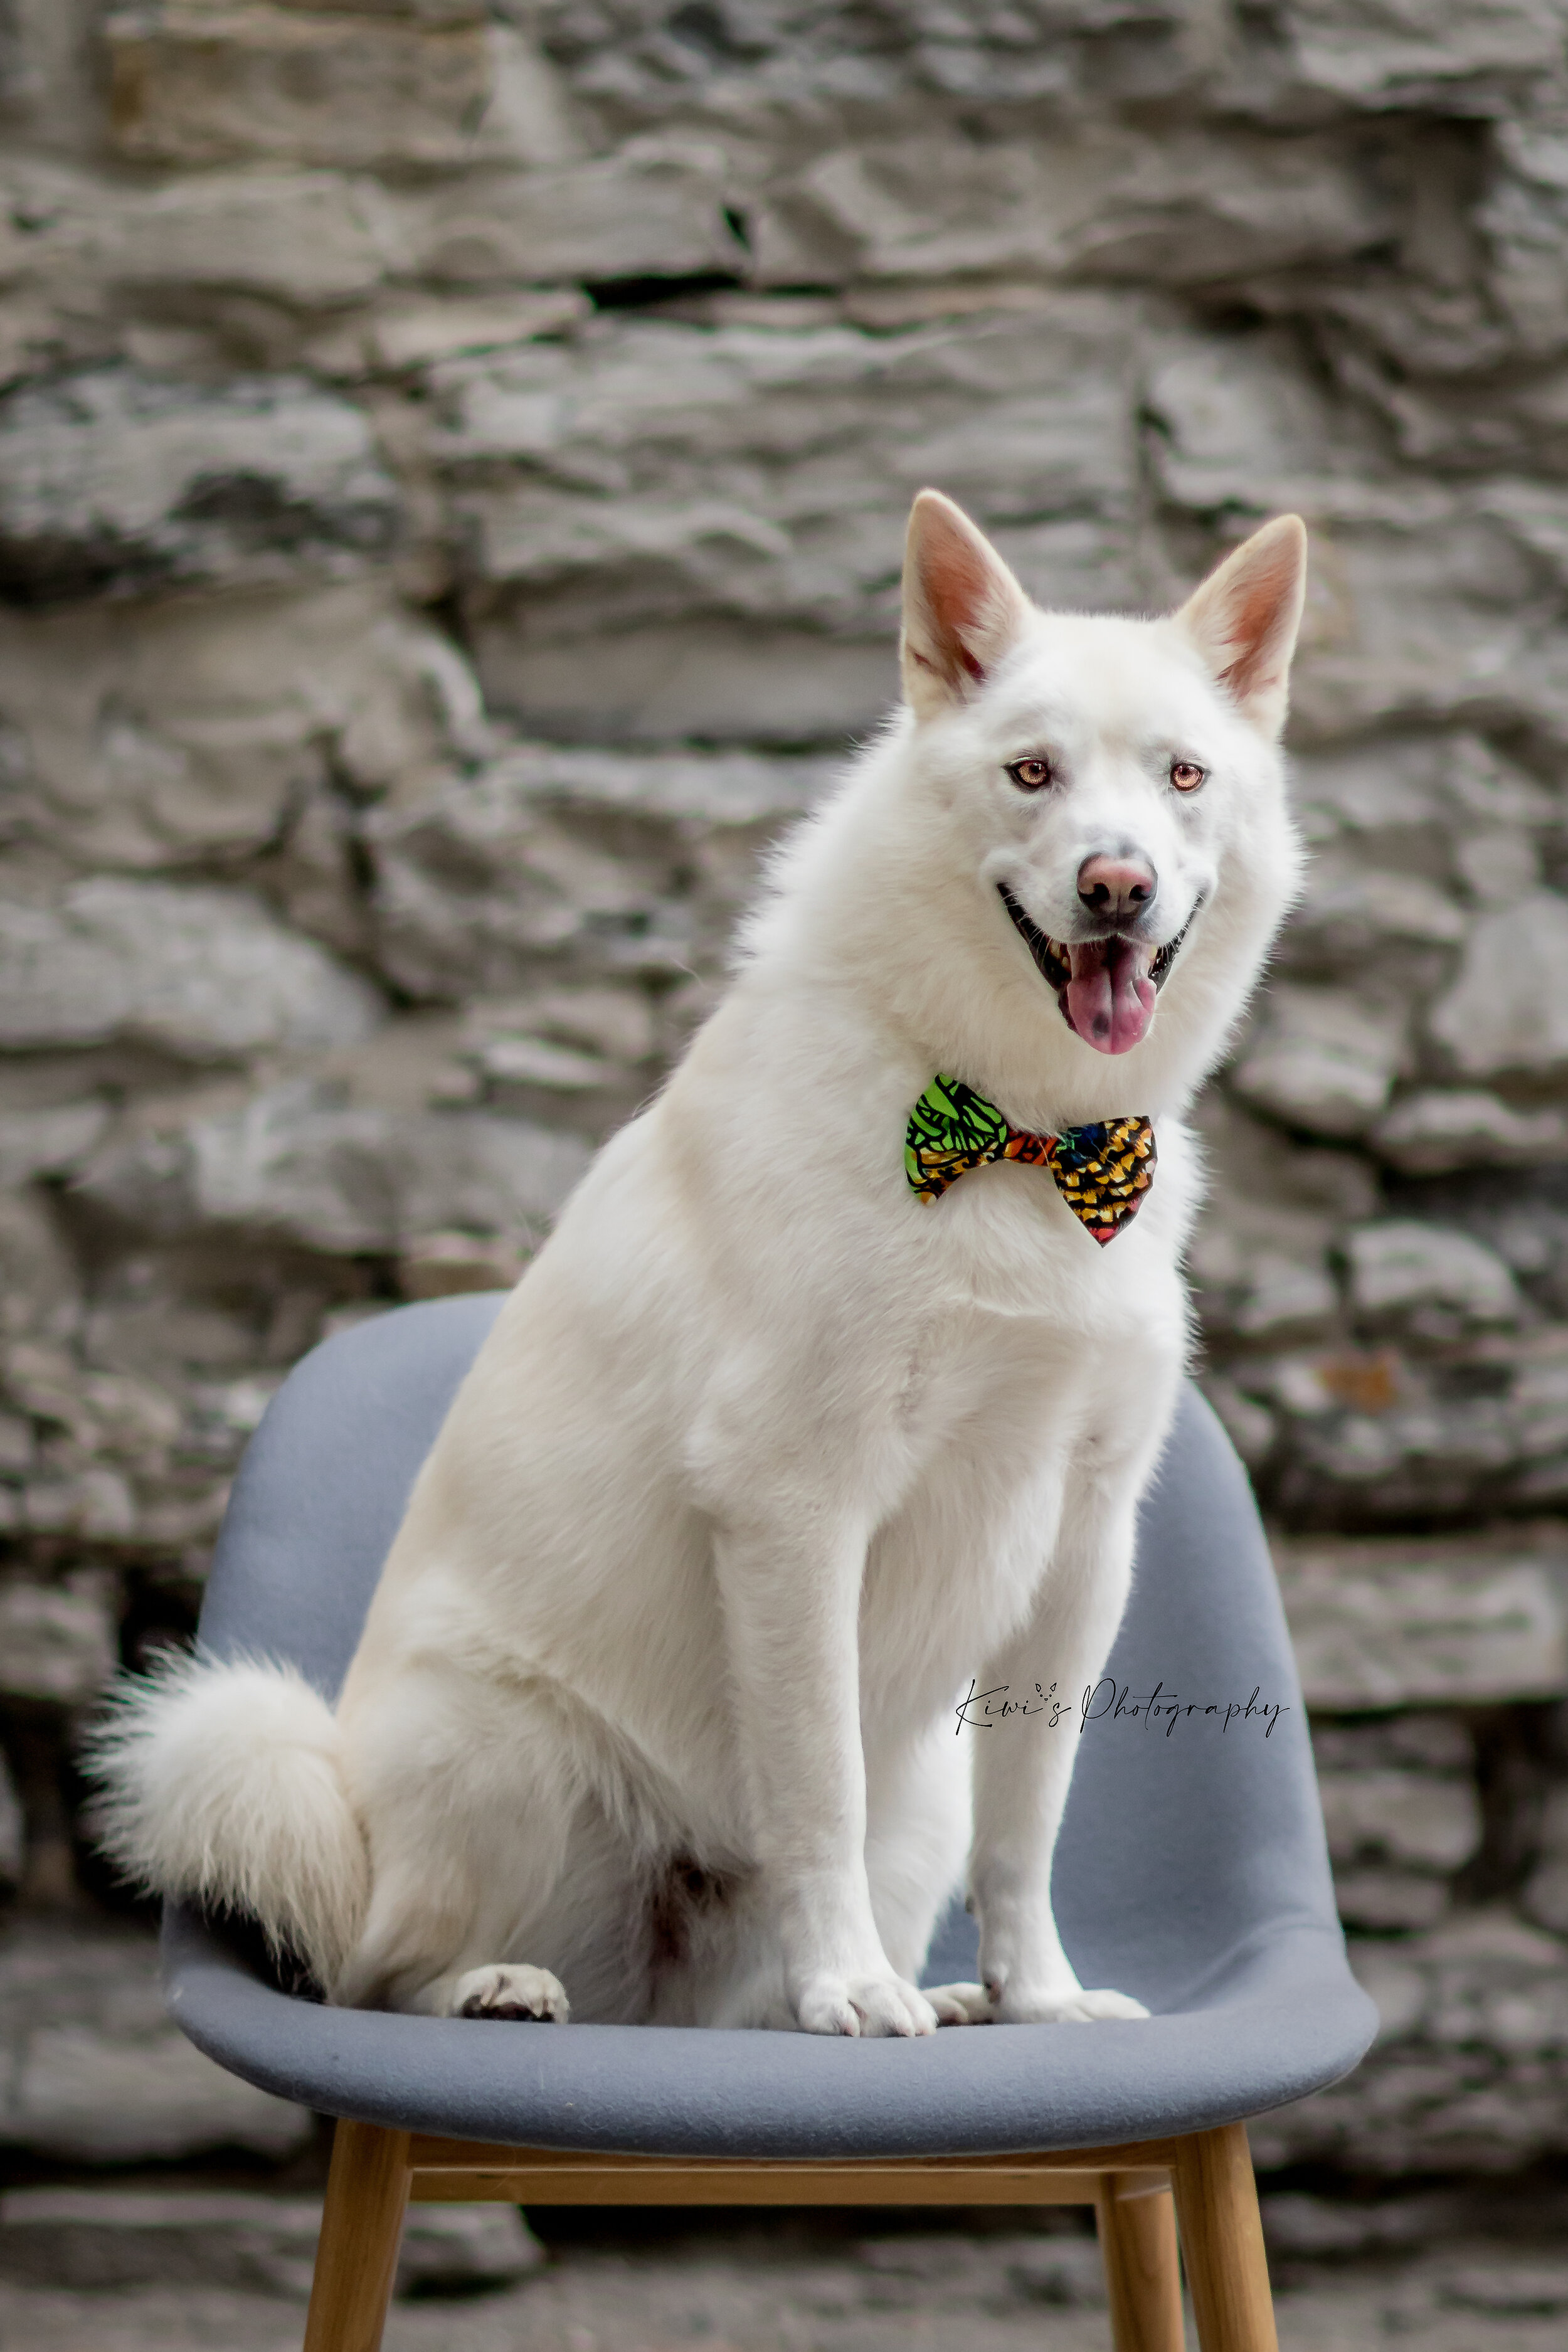 This is Shiro the husky. His mom is half Japanese (like me!) and his name means “white” in Japanese. Isn’t he gorgeous?